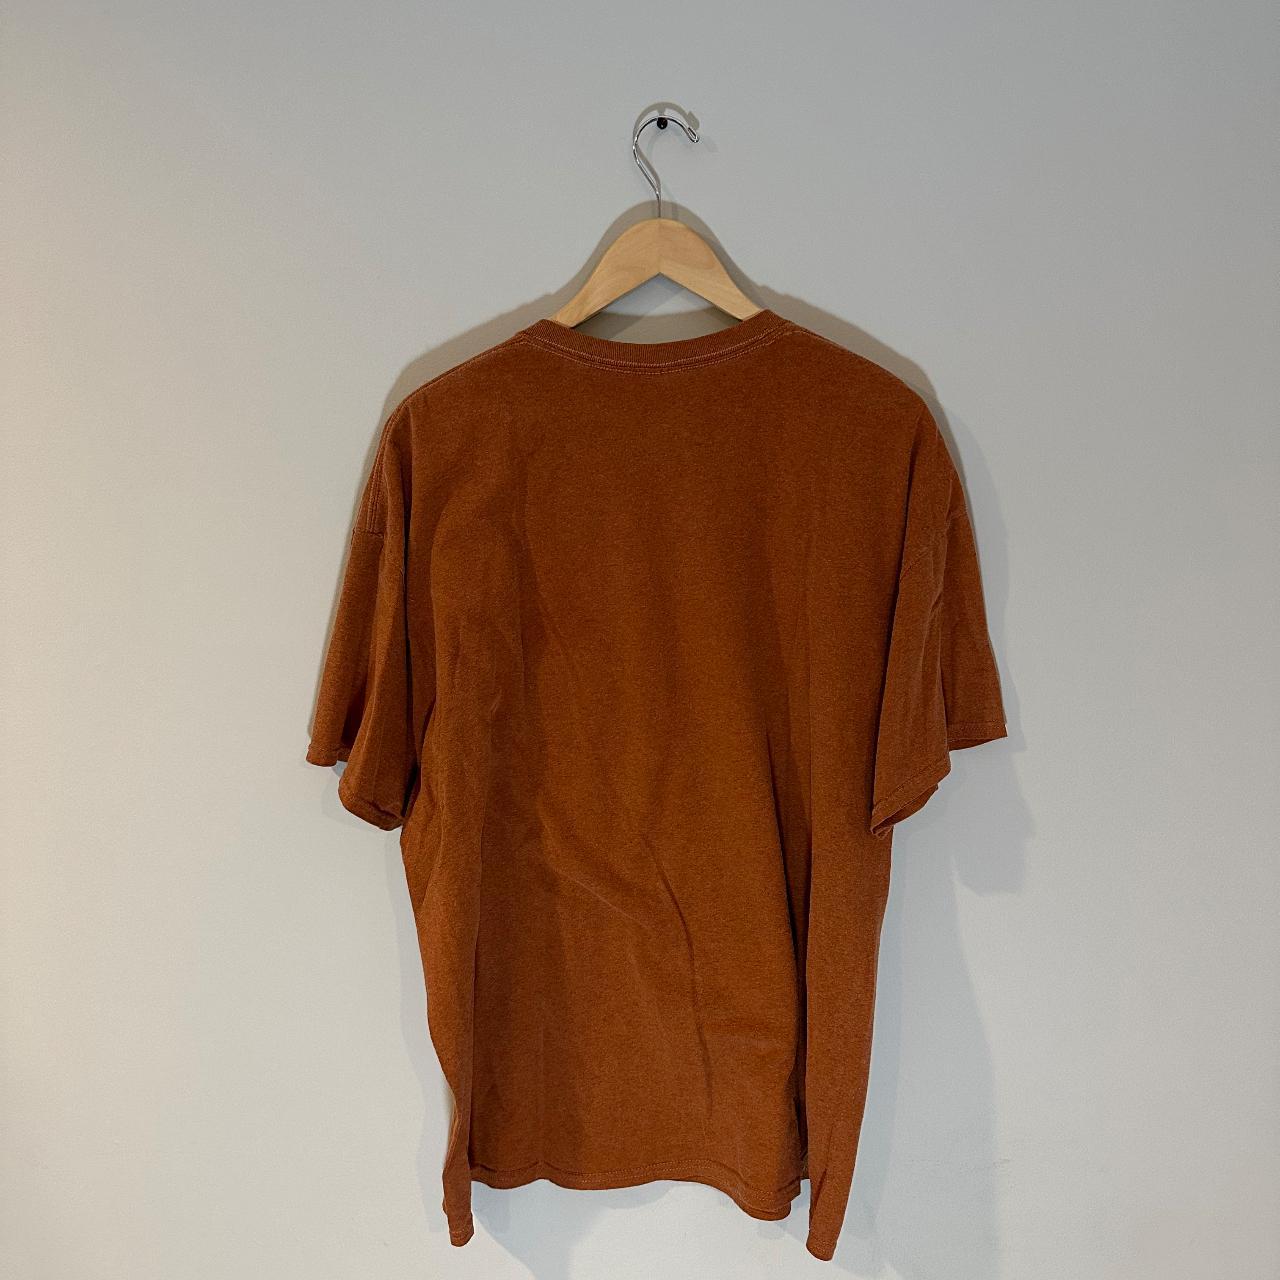 Urban Outfitters Men's Brown and Orange T-shirt (2)